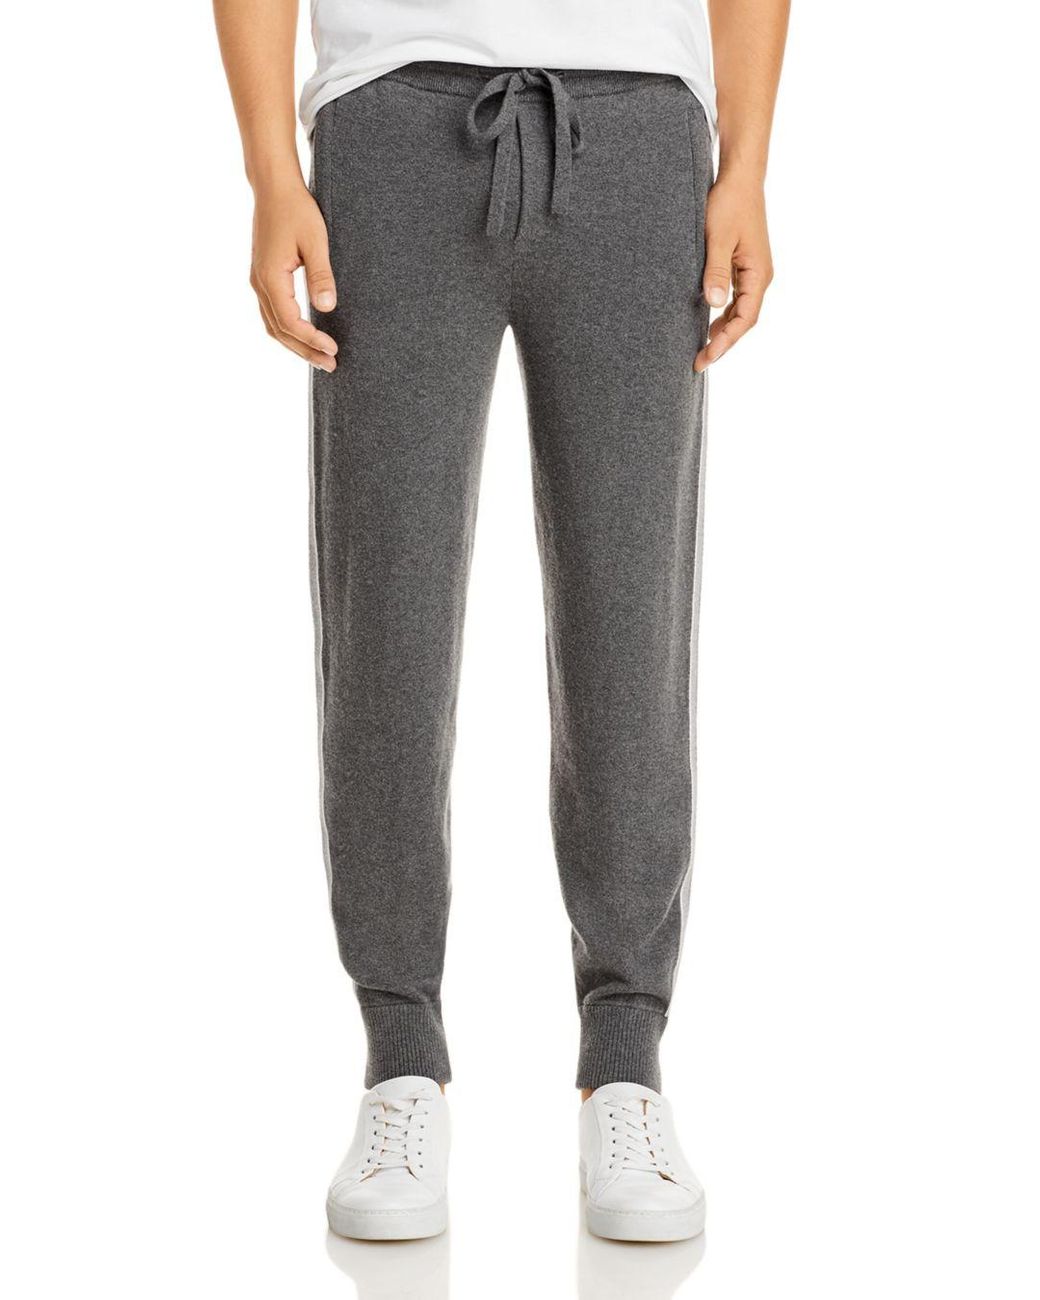 Vince Cotton Cashmere Joggers in Gray for Men - Lyst